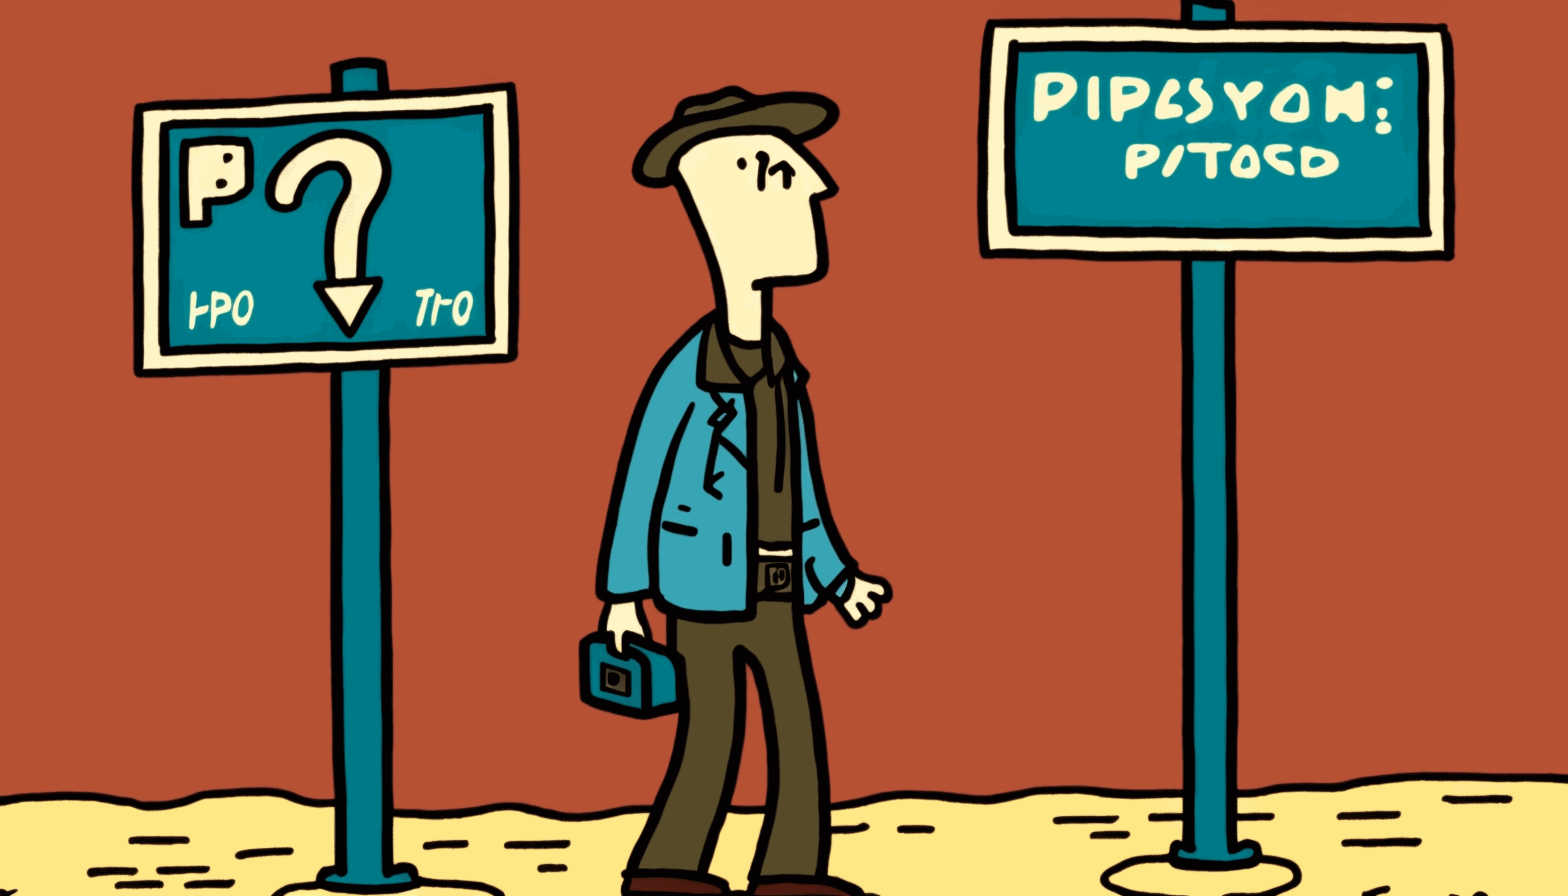 A cartoon image of a person standing at a crossroads, with a signpost showing IPv4 and IPv6 directions, representing the choice and transition between the two protocols.